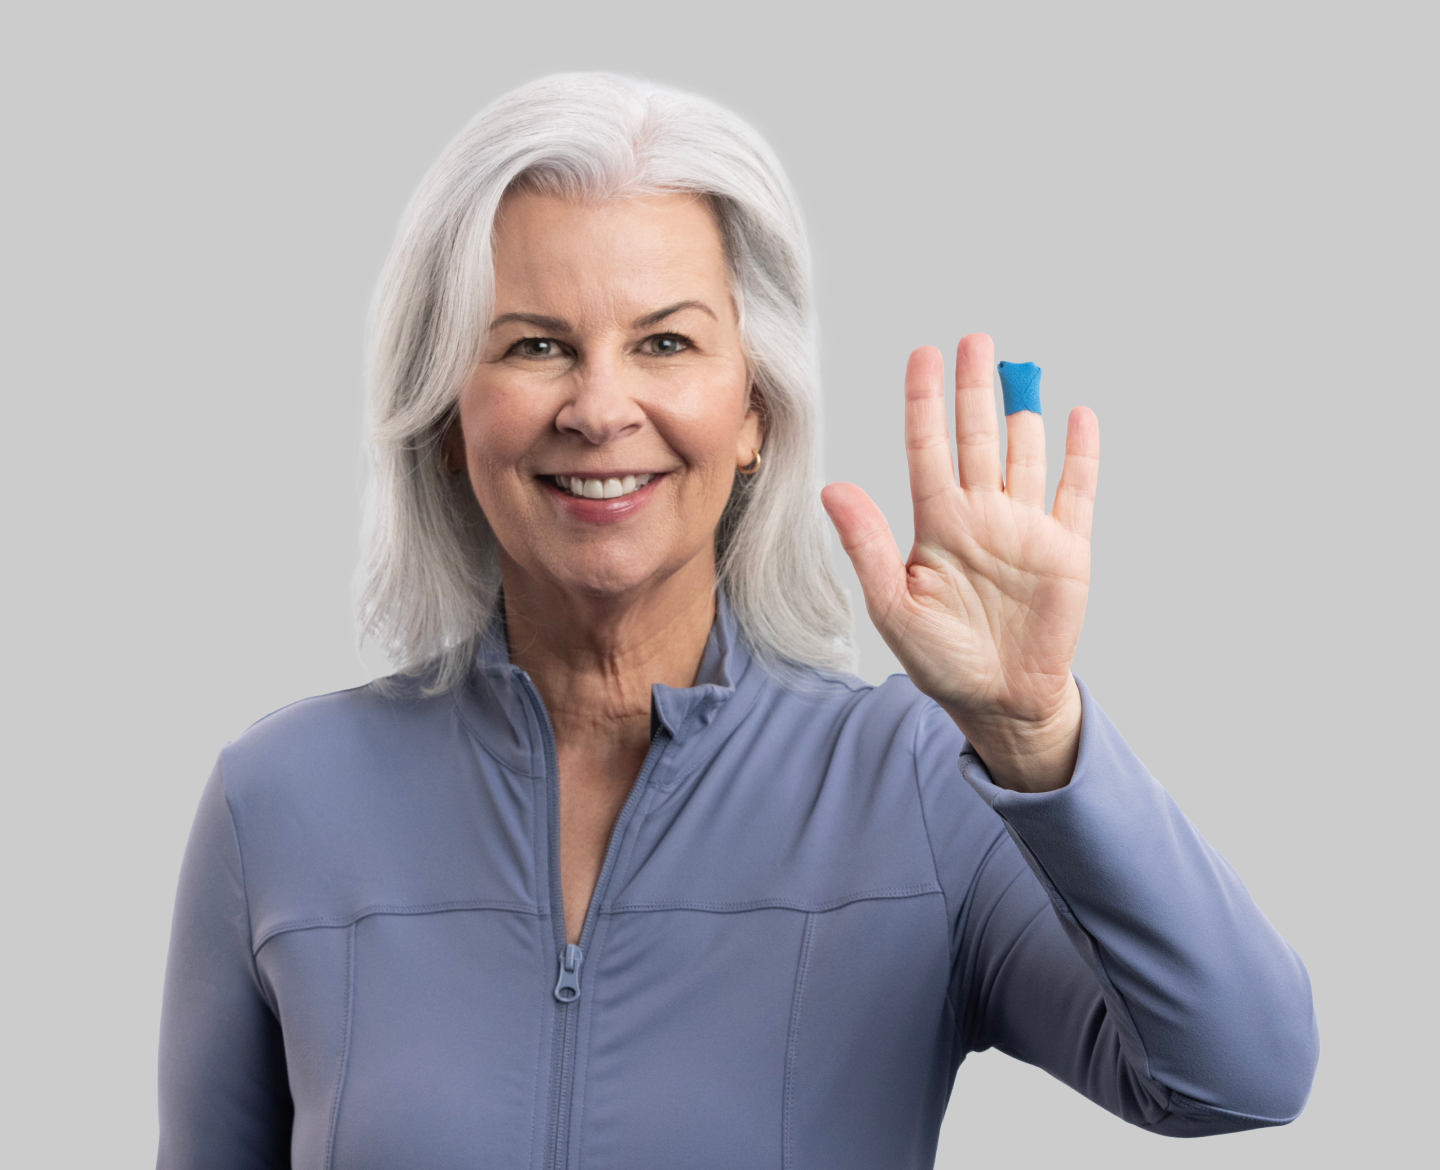 Photo of woman with blue bandage on finger